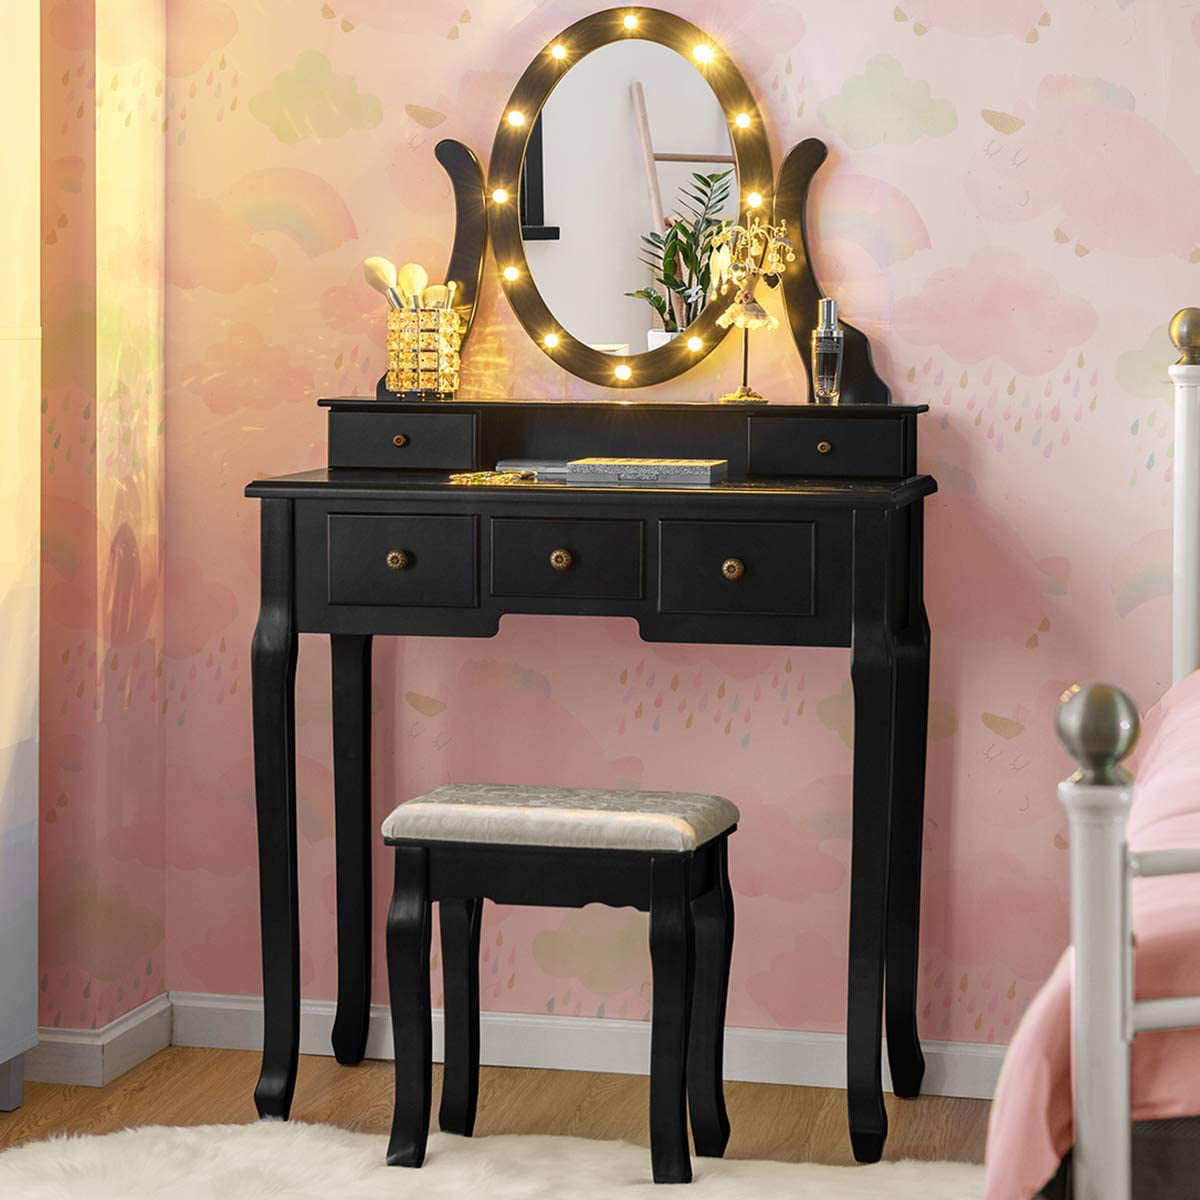 Details about   10 LED Lights Vanity Table Set with Lighted Mirror Makeup Dressing Dresser Table 